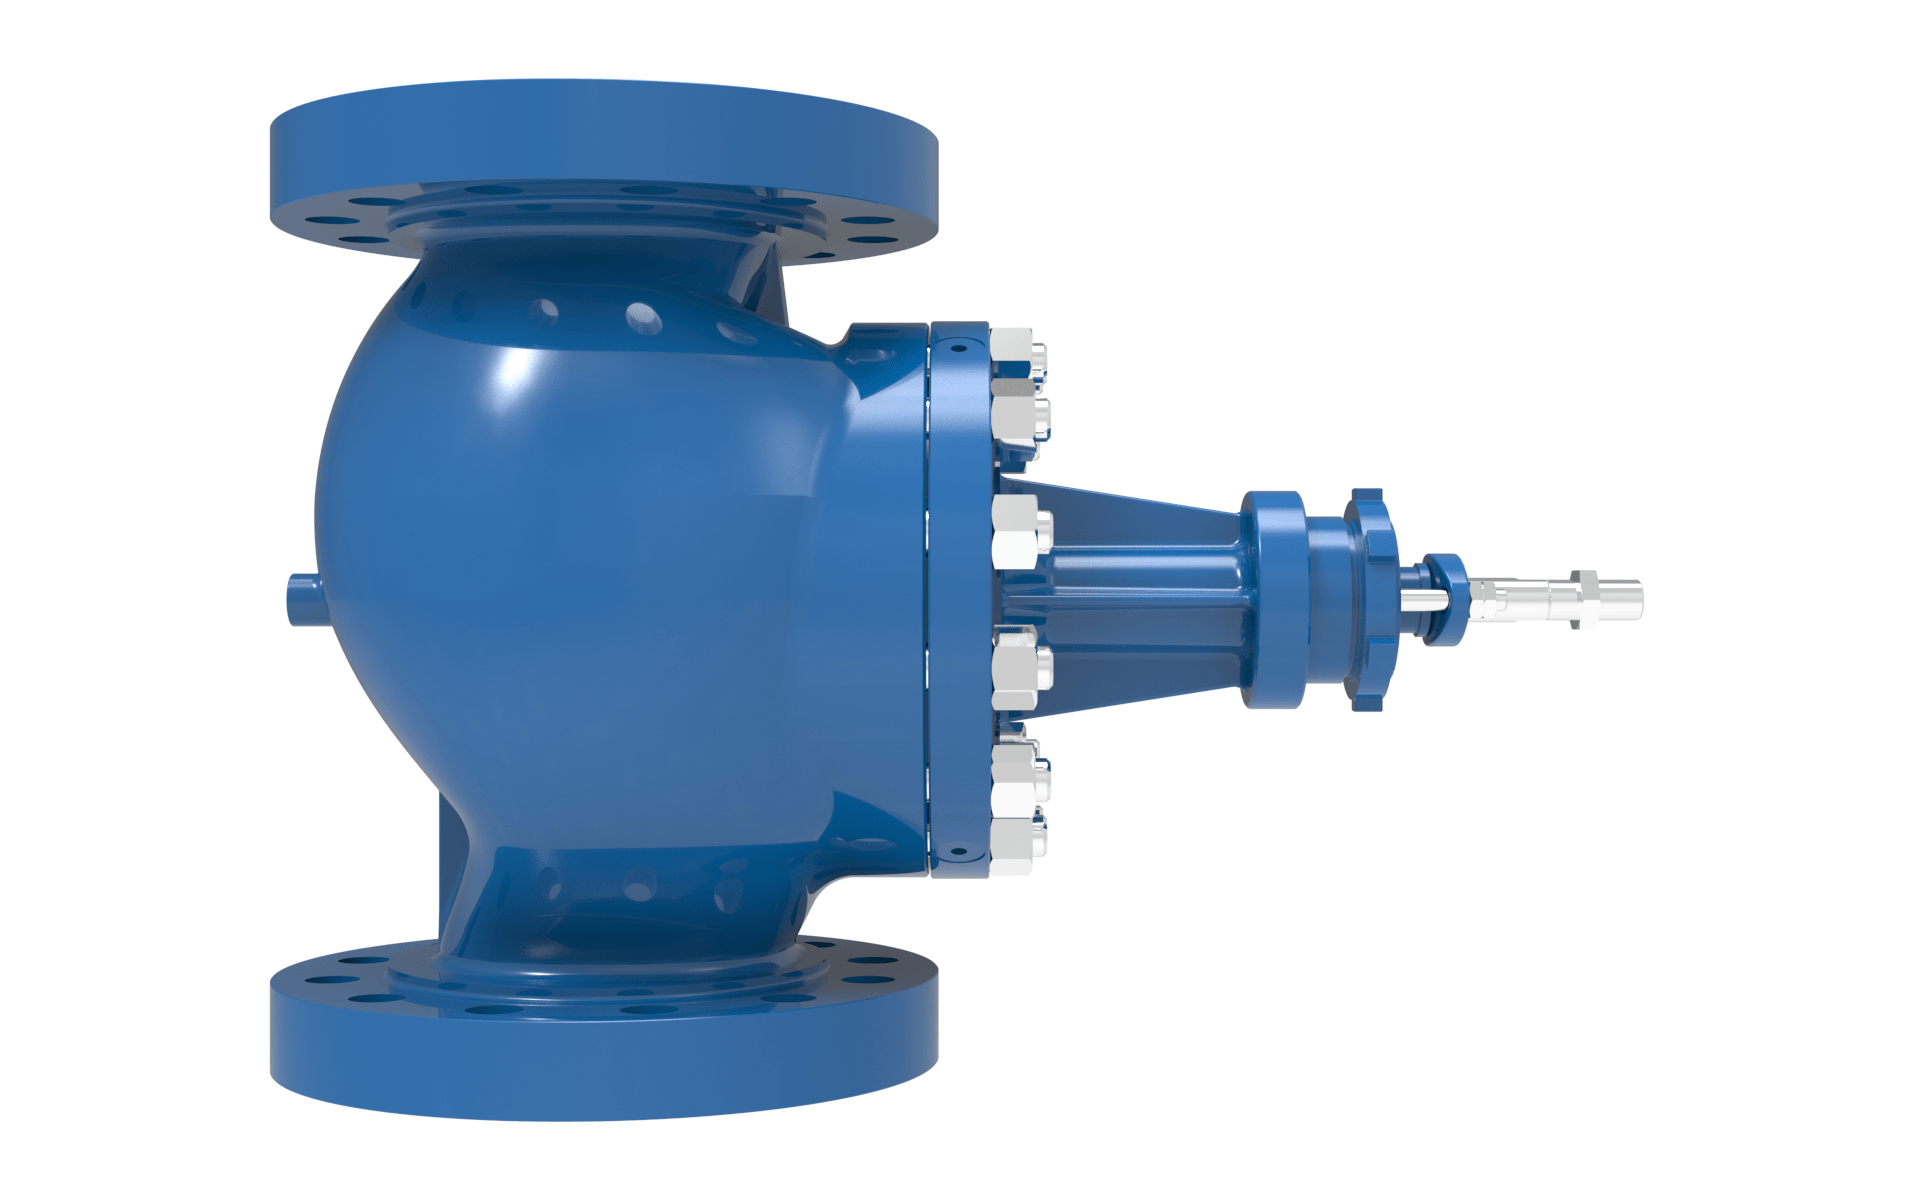 BLAKEBOROUGH® BV500 CAGE TRIM VALVES UP TO CLASS 600LB RATING right side view